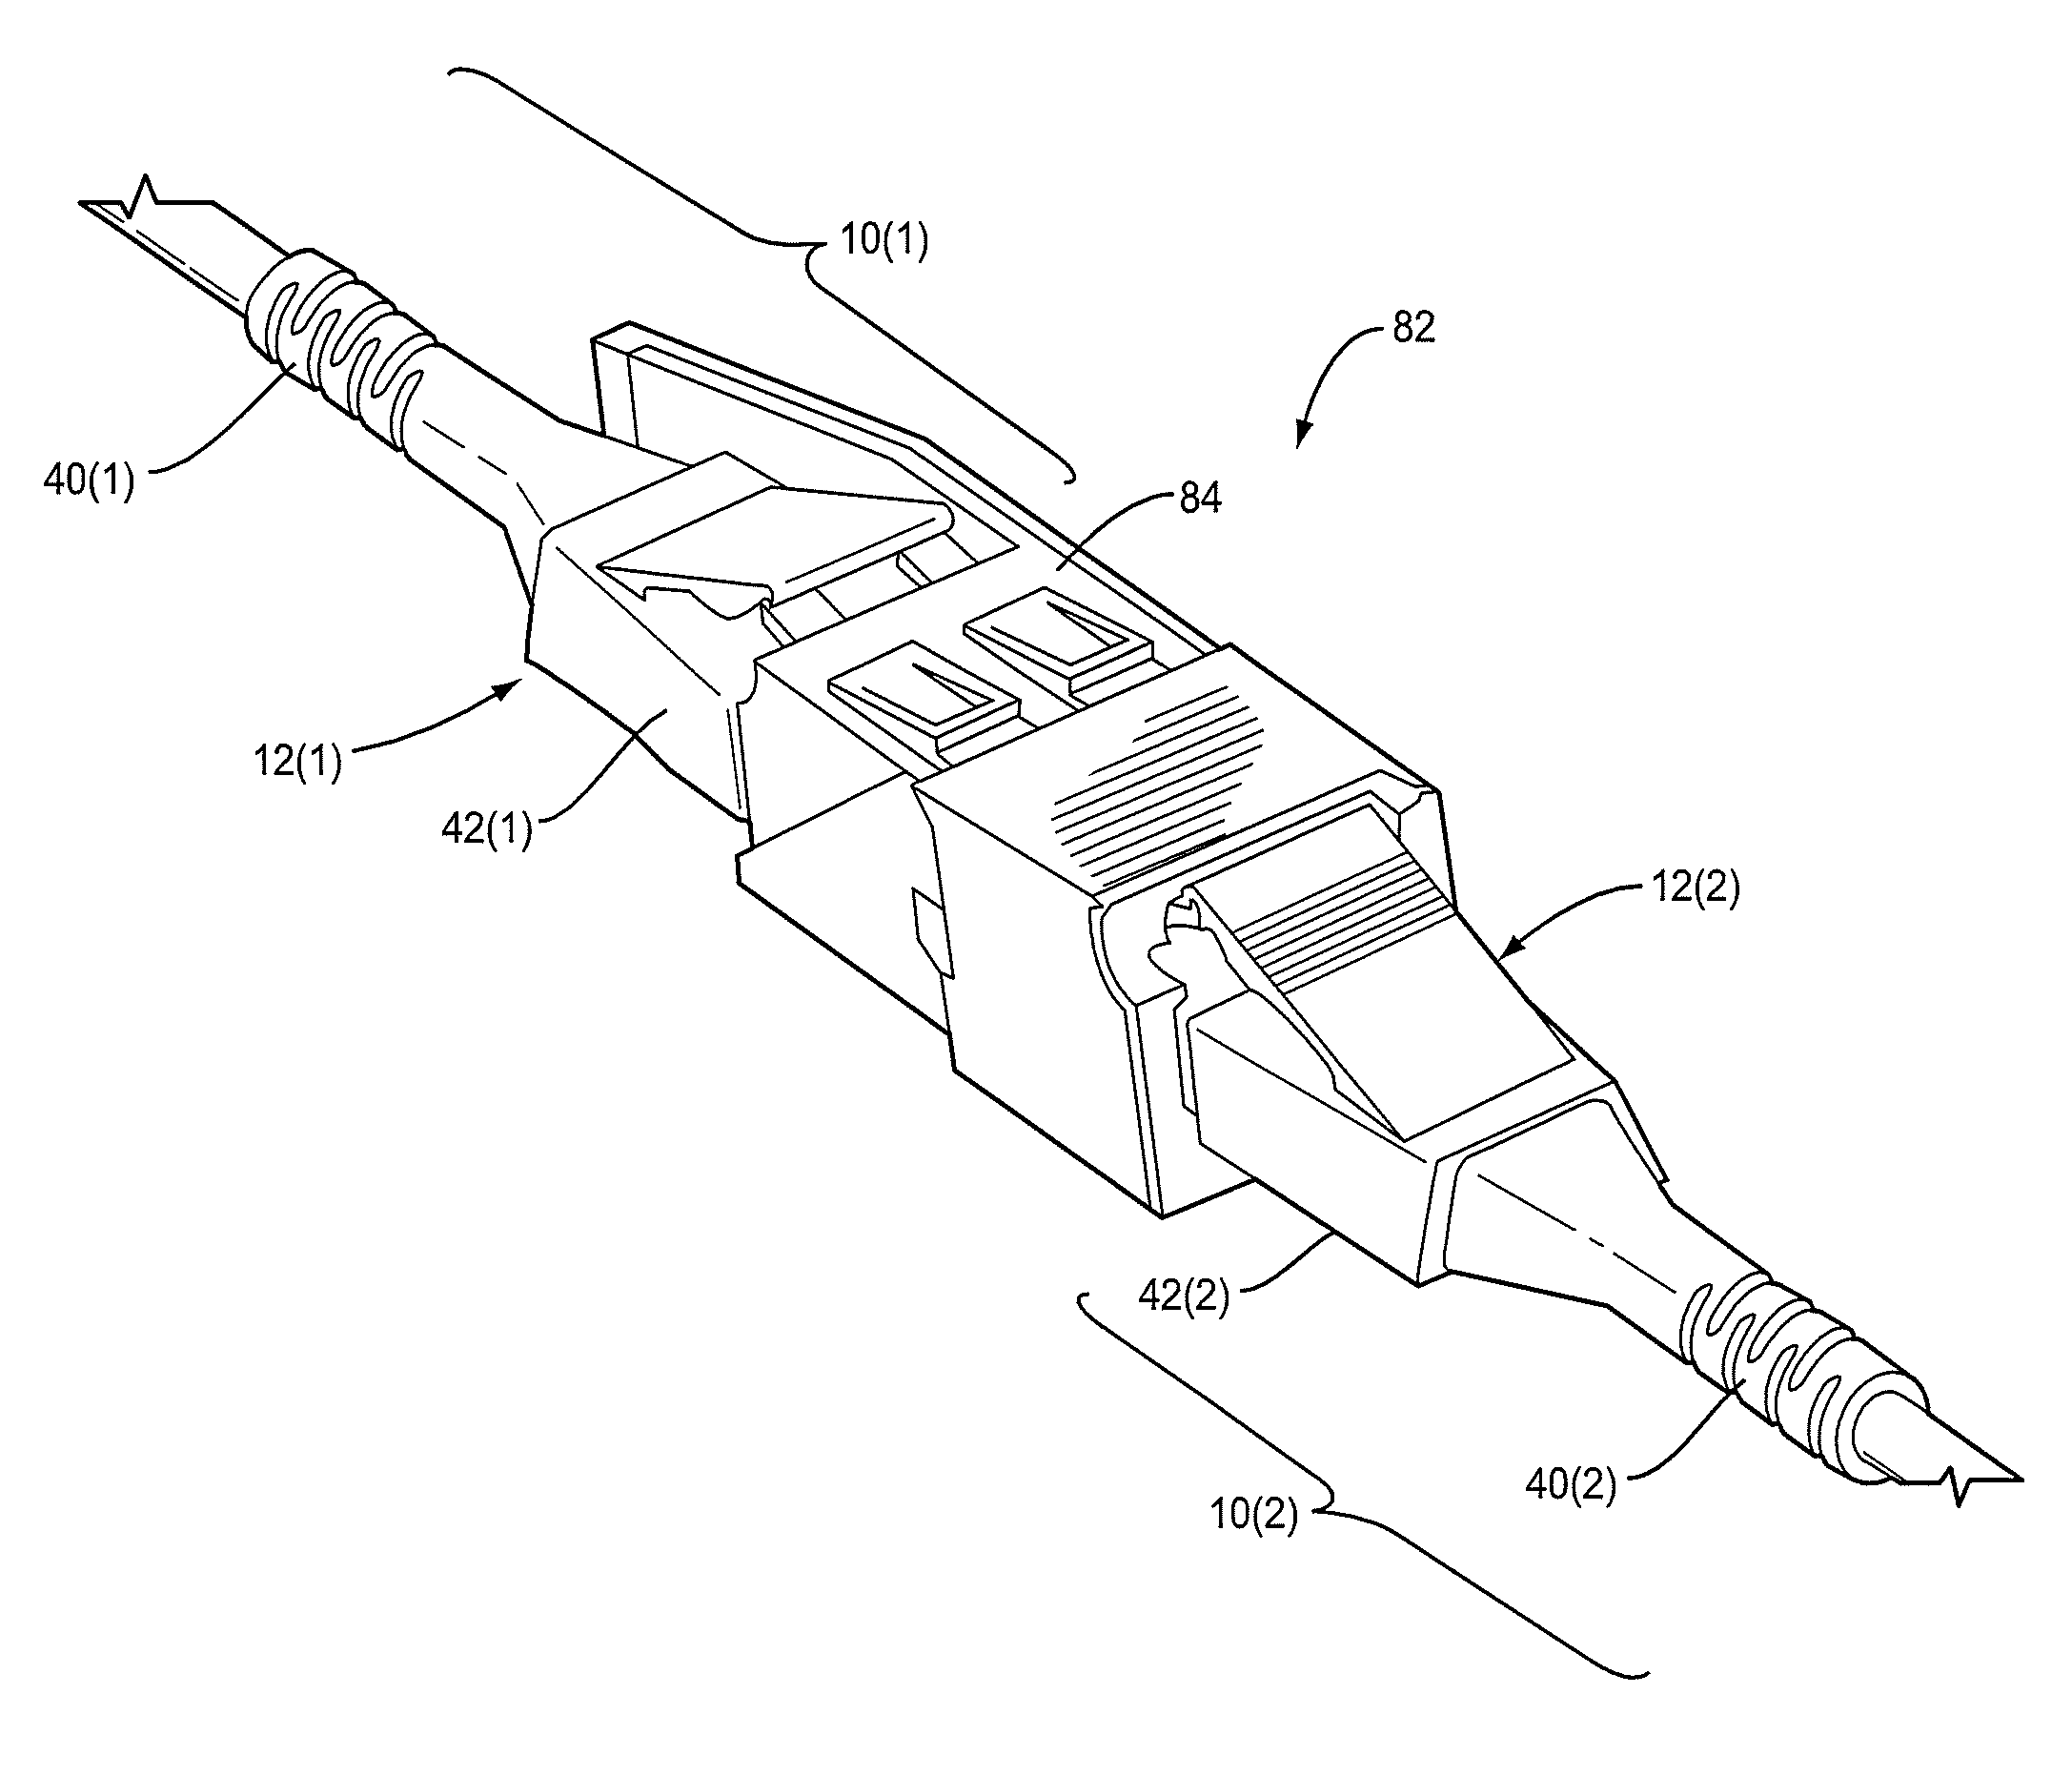 Cables and connector assemblies employing a furcation tube(s) for radio-frequency identification (RFID)-equipped connectors, and related systems and methods